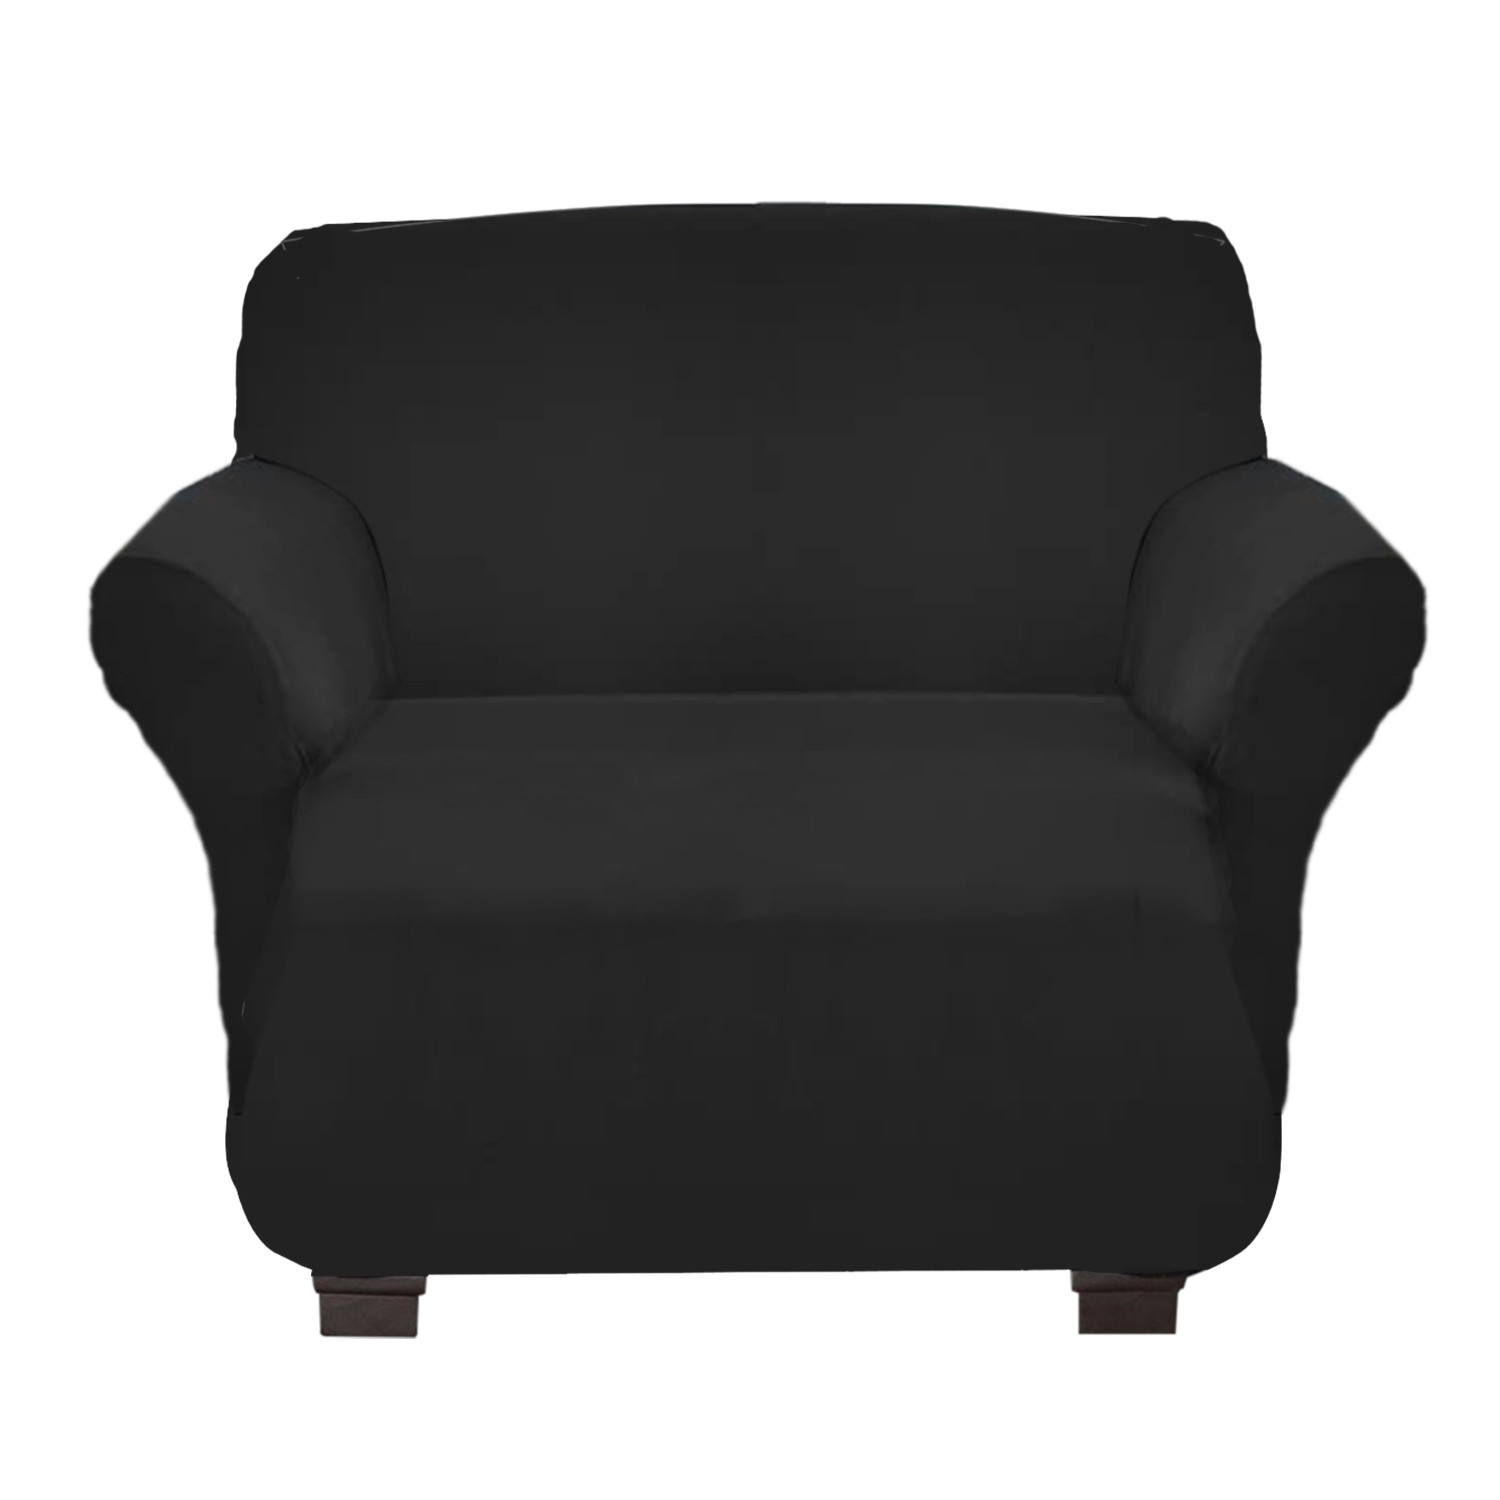 Kuber Industries Stretchable, Non-Slip Polyster 1 & 3 Seater Sofa Cover & Chair Cover Set, Set of 3 (Black)